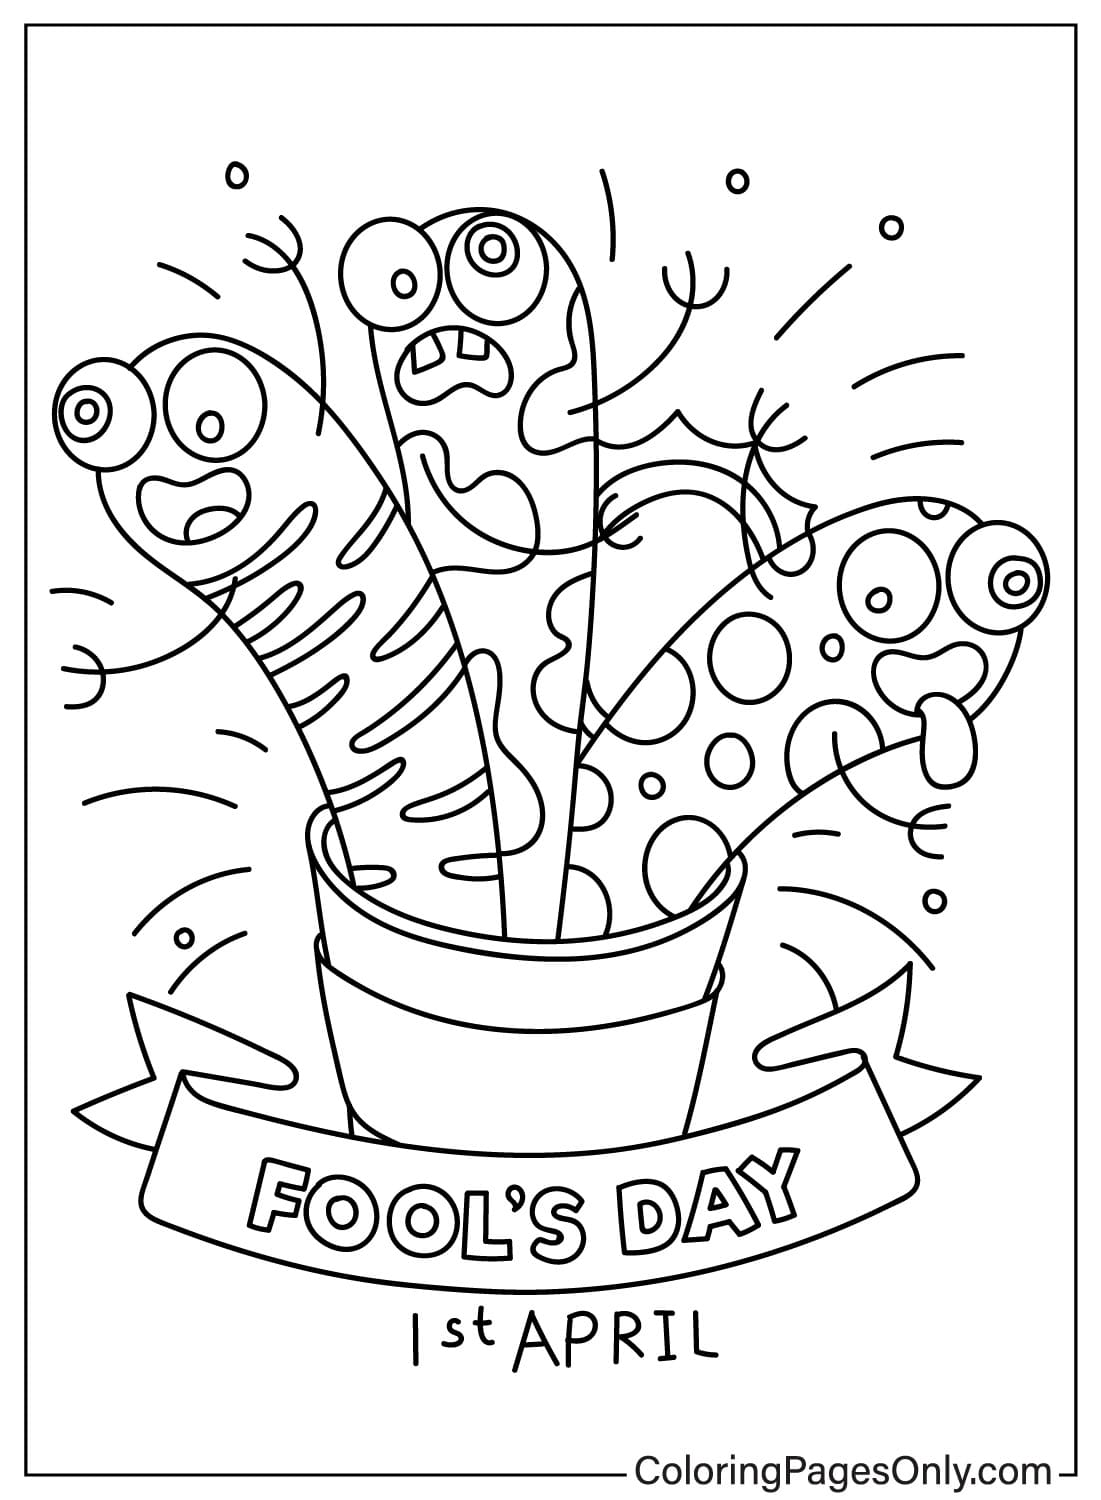 Coloring Page April Fool’s Day from April Fool's Day